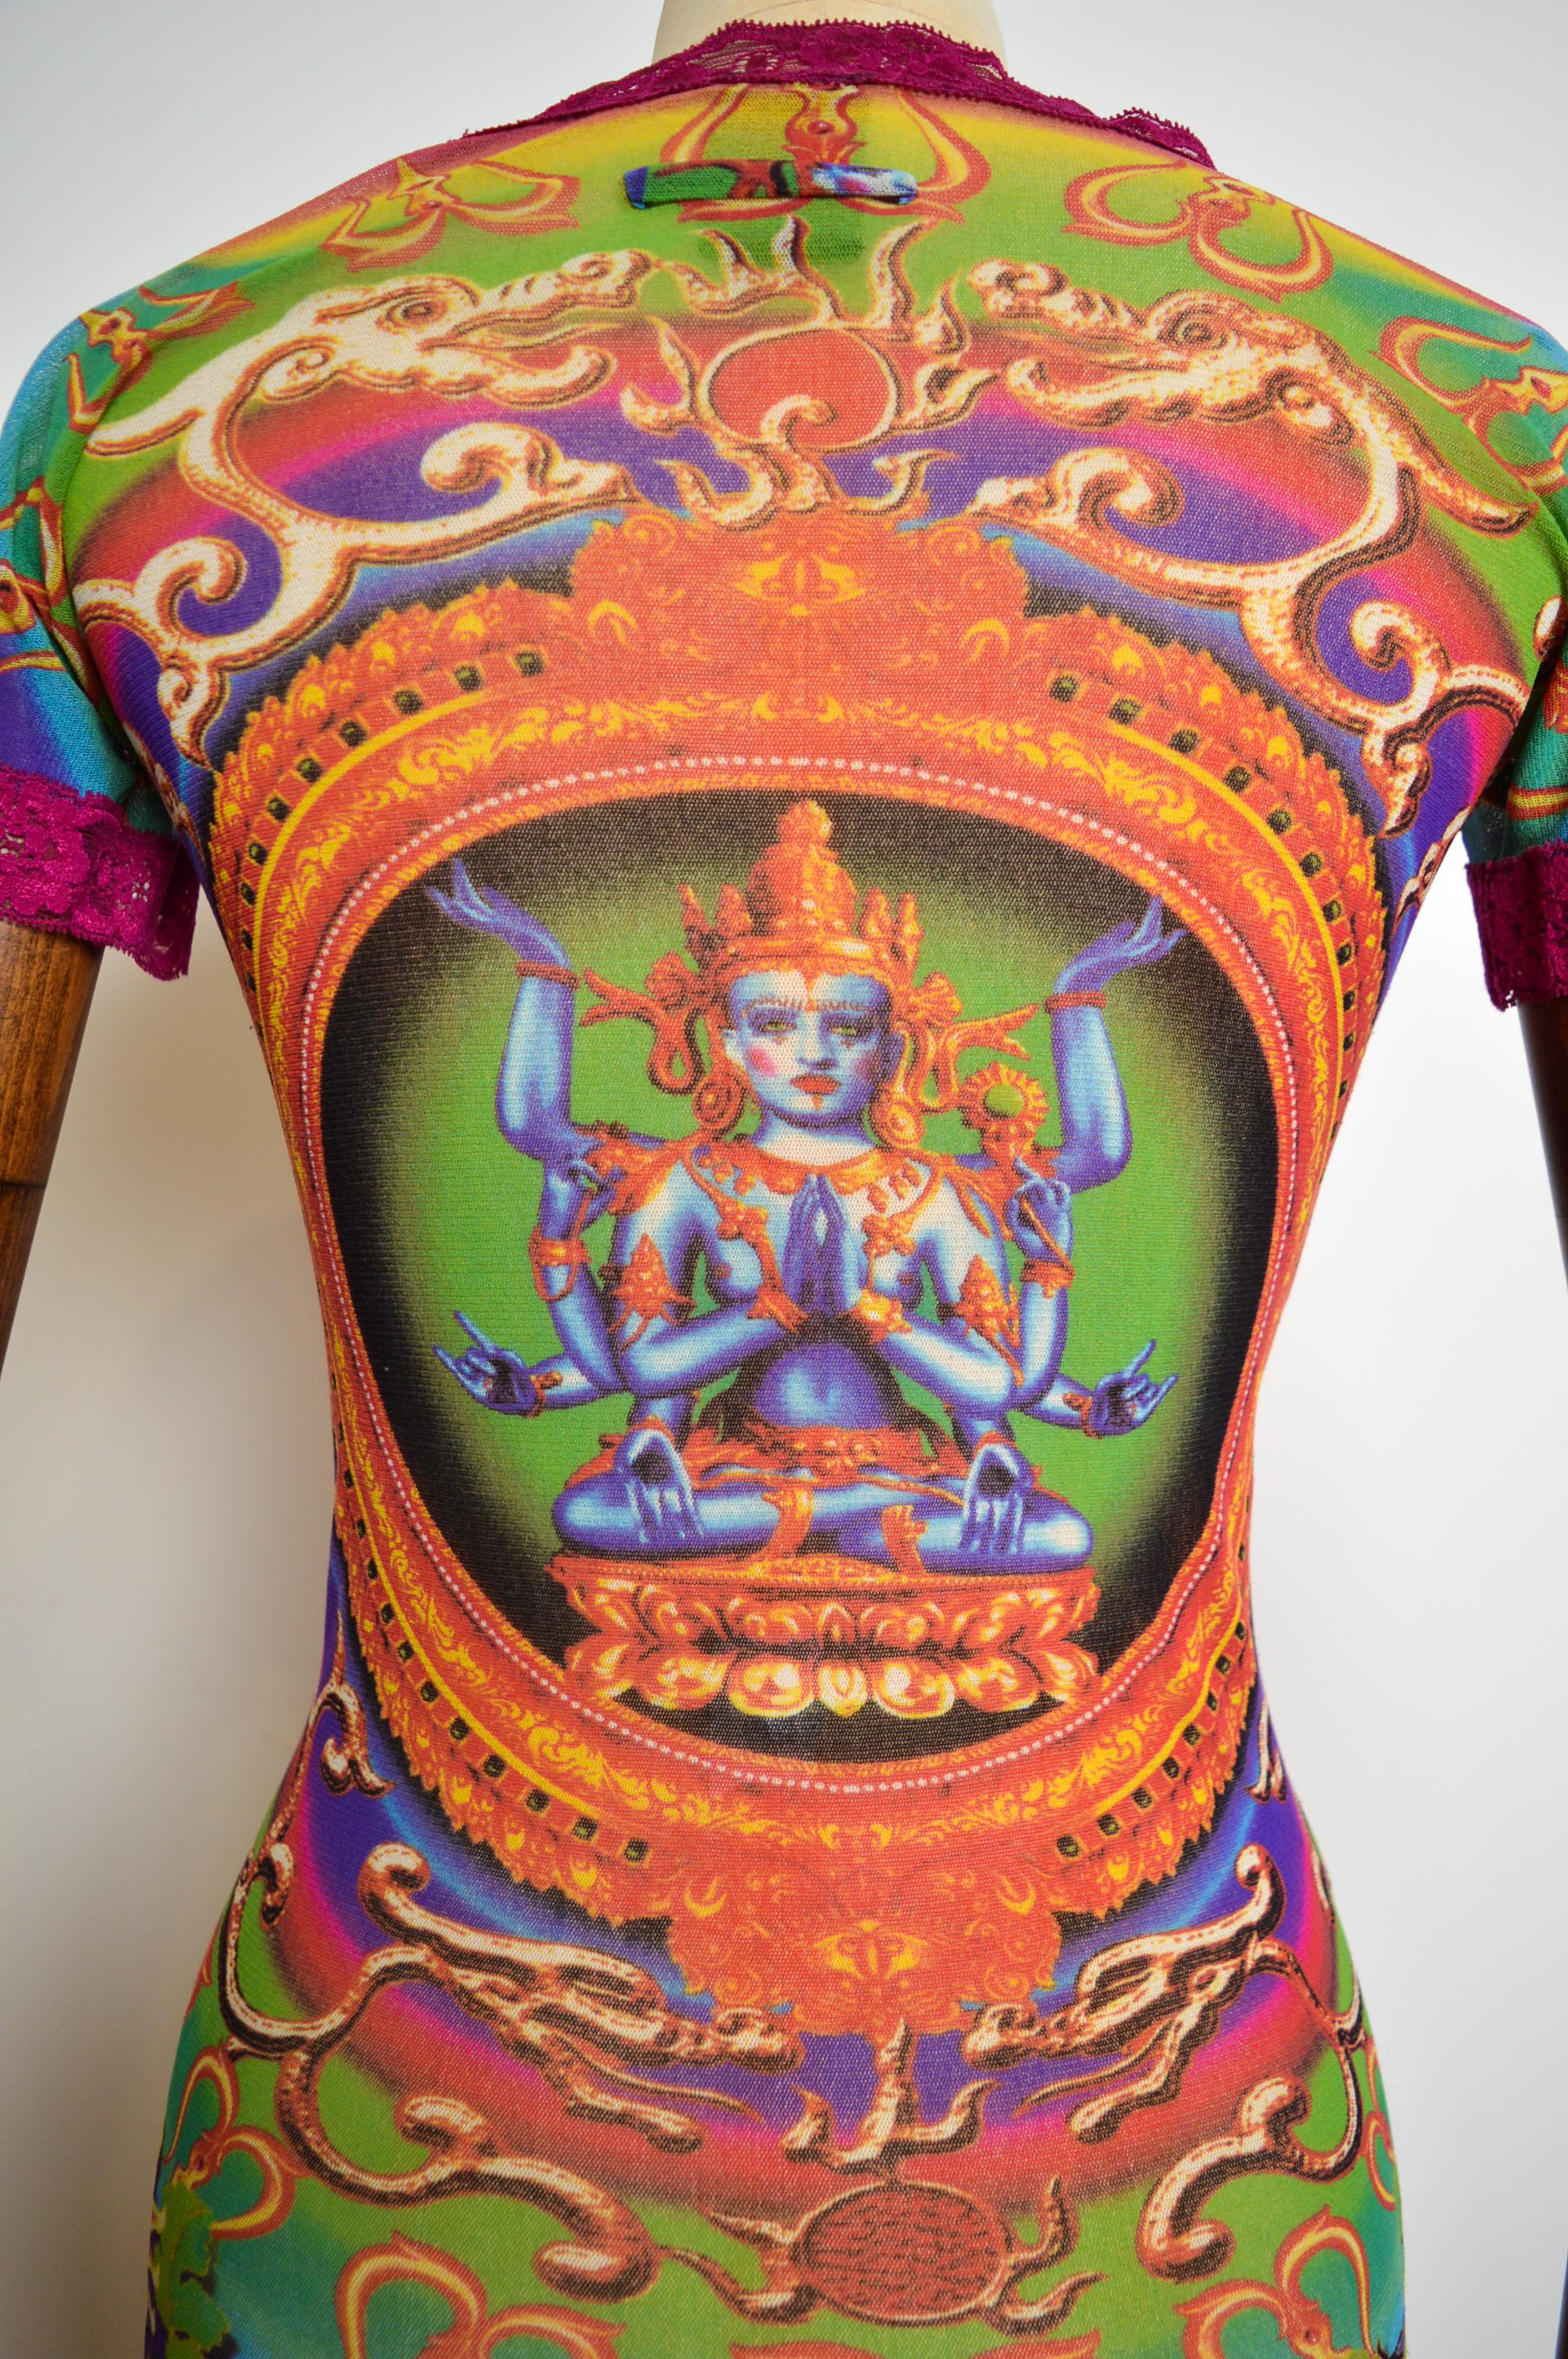 1993 Jean Paul Gaultier Blue Goddess Hindu Diety Colourful Mesh Top - Baby Tee For Sale 2